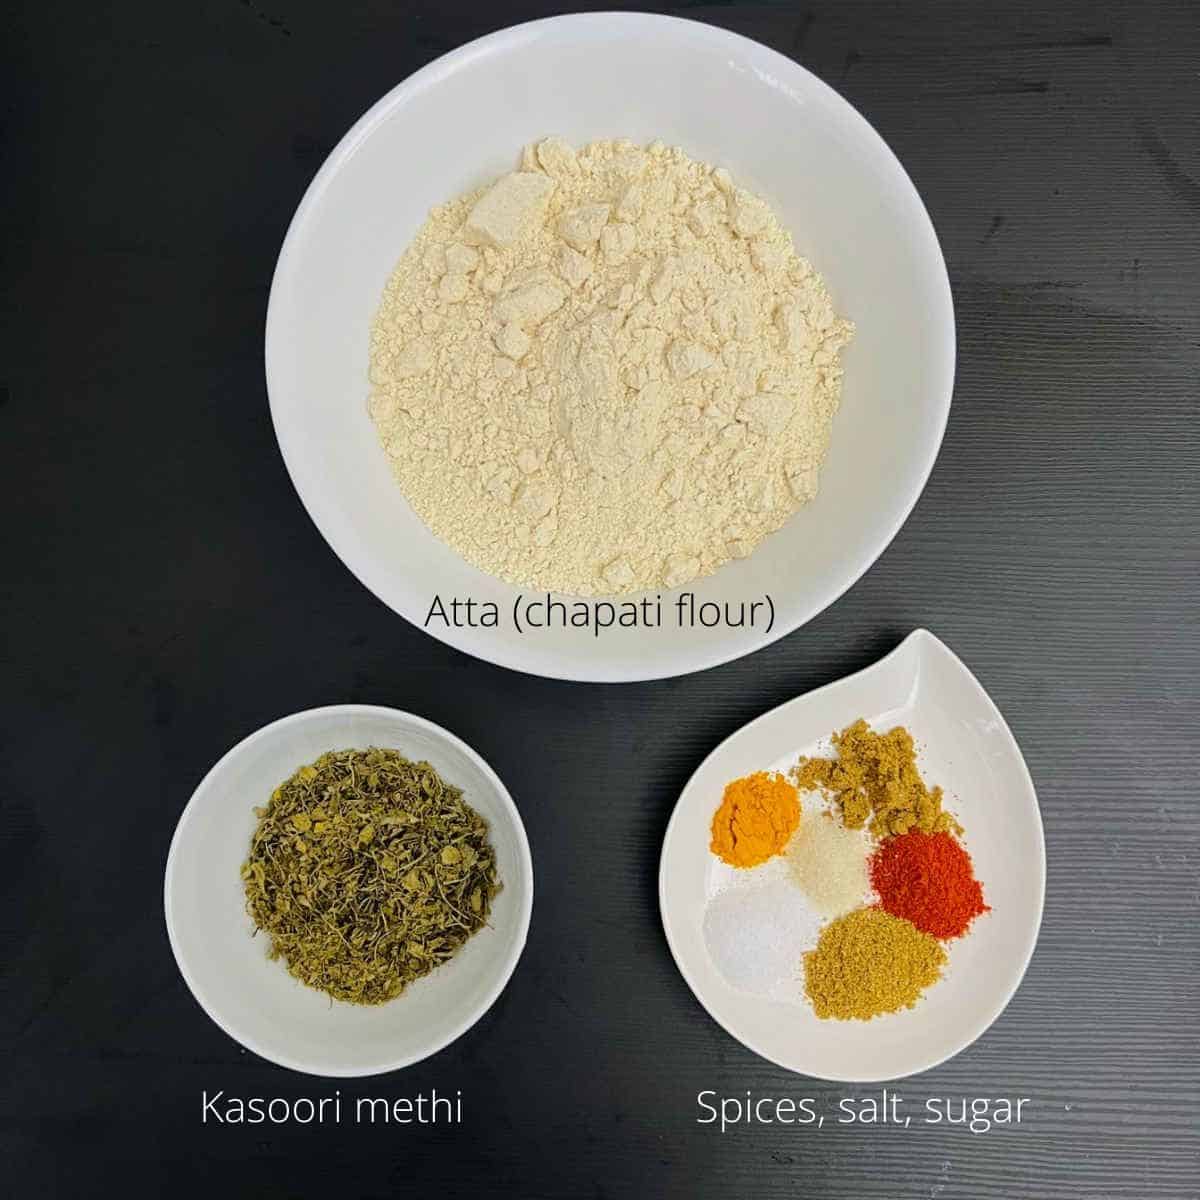 methi thepla ingredients with labels.